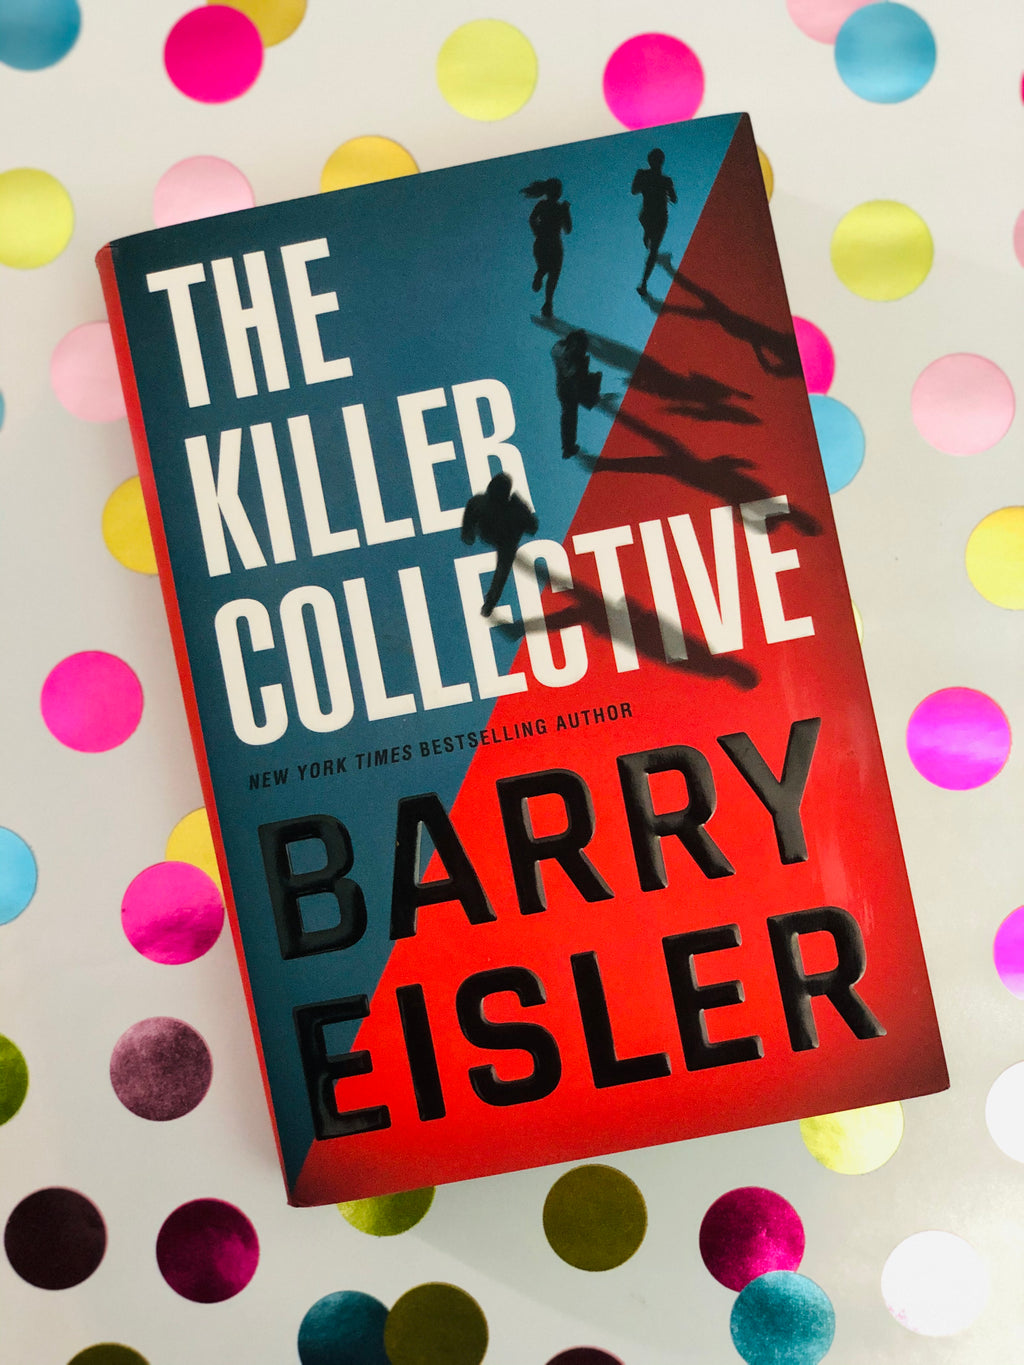 The Killer Collective- By Barry Eisler